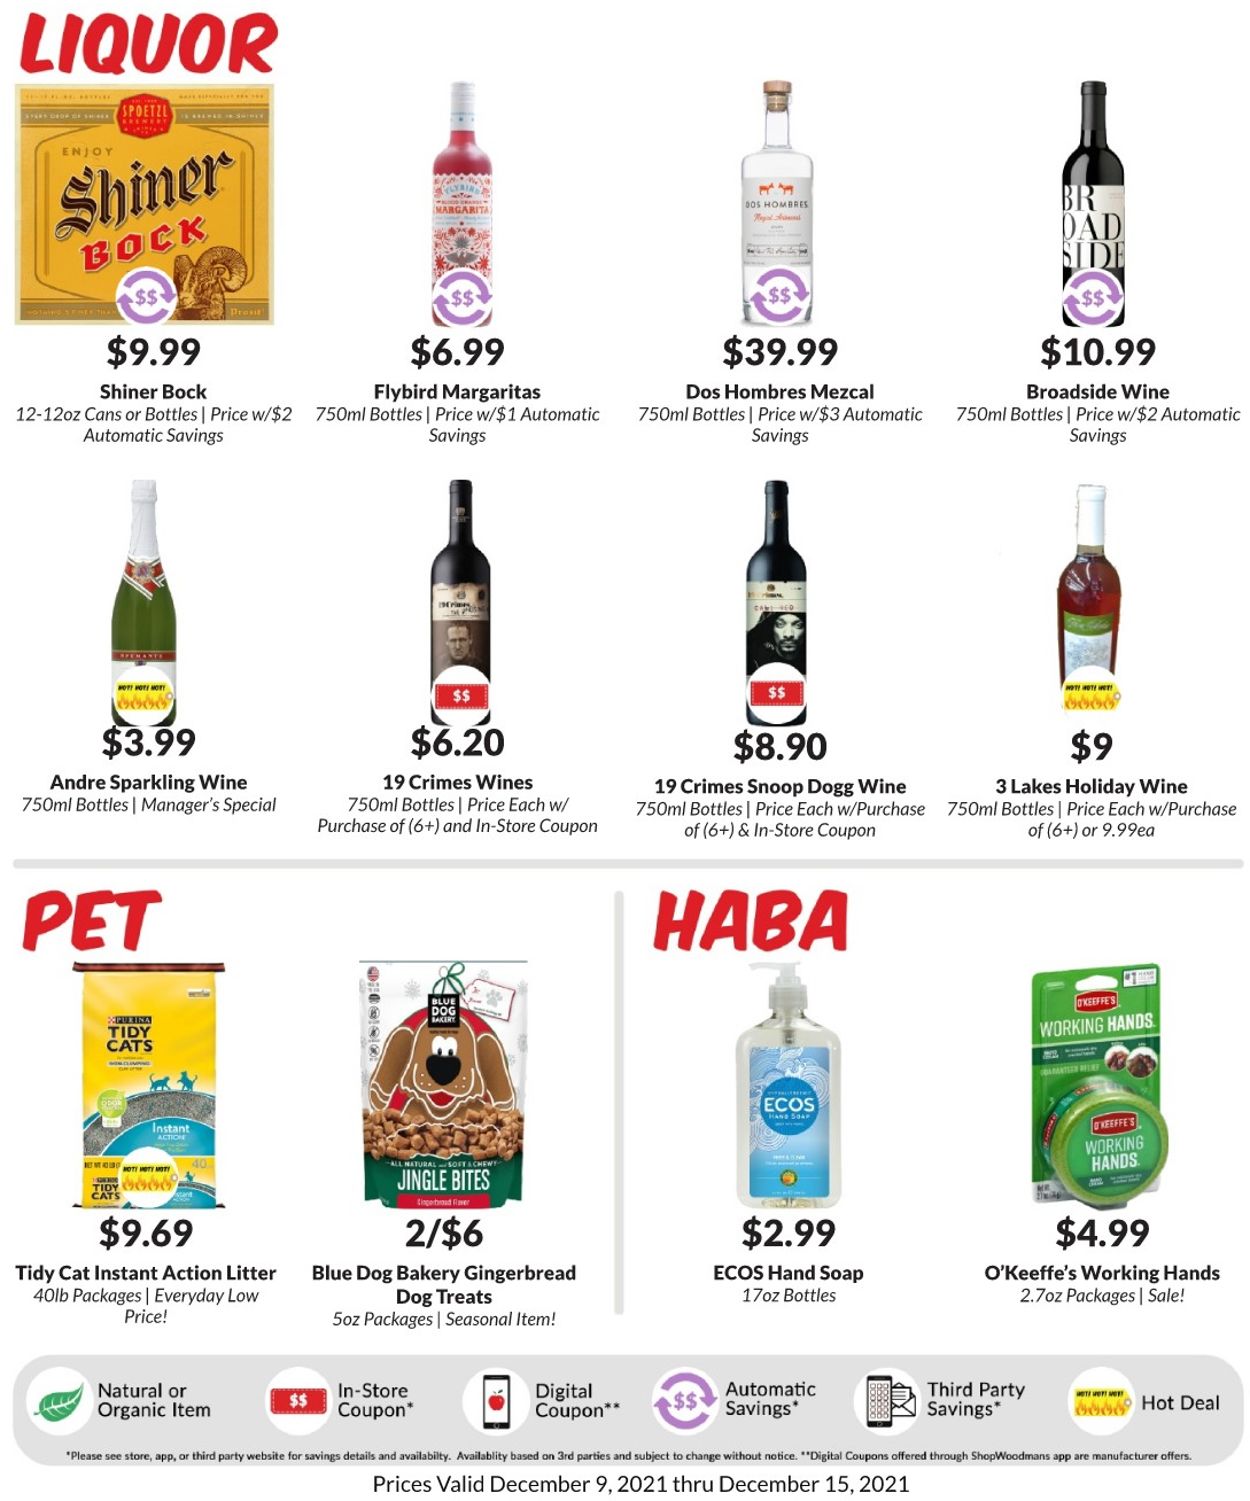 Woodman's Market Ad from 12/09/2021